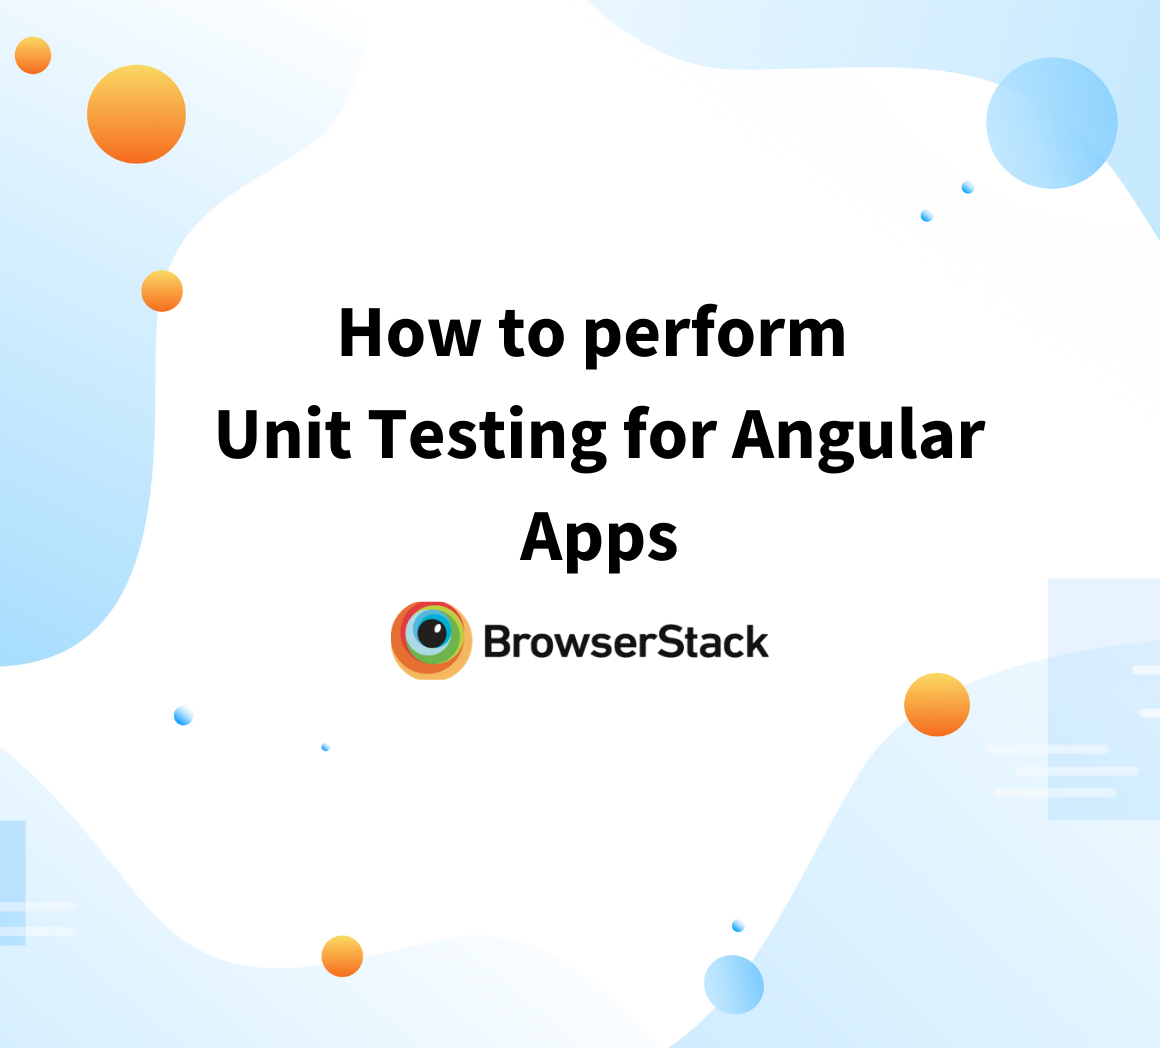 How to perform Unit Testing for Angular Apps